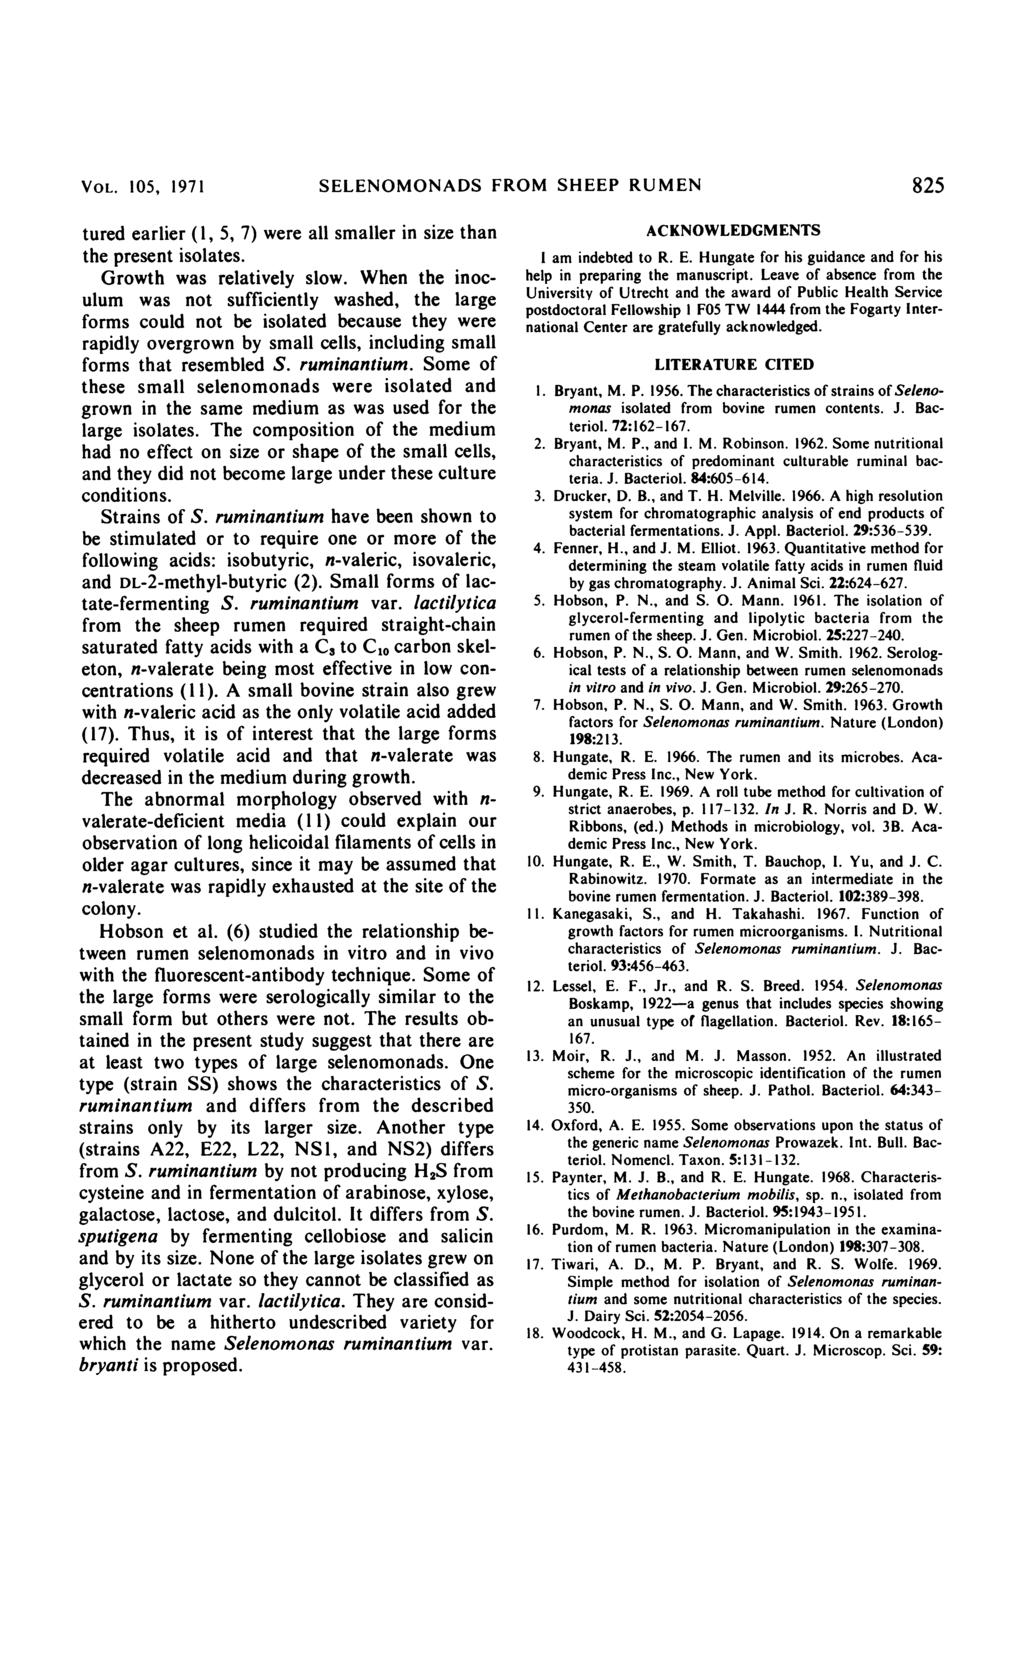 VOL. 105, 1971 SELENOMONADS FR( :)M SHEEP RUMEN 825 tured earlier (1, 5, 7) were all smaller in size than the present isolates. Growth was relatively slow.